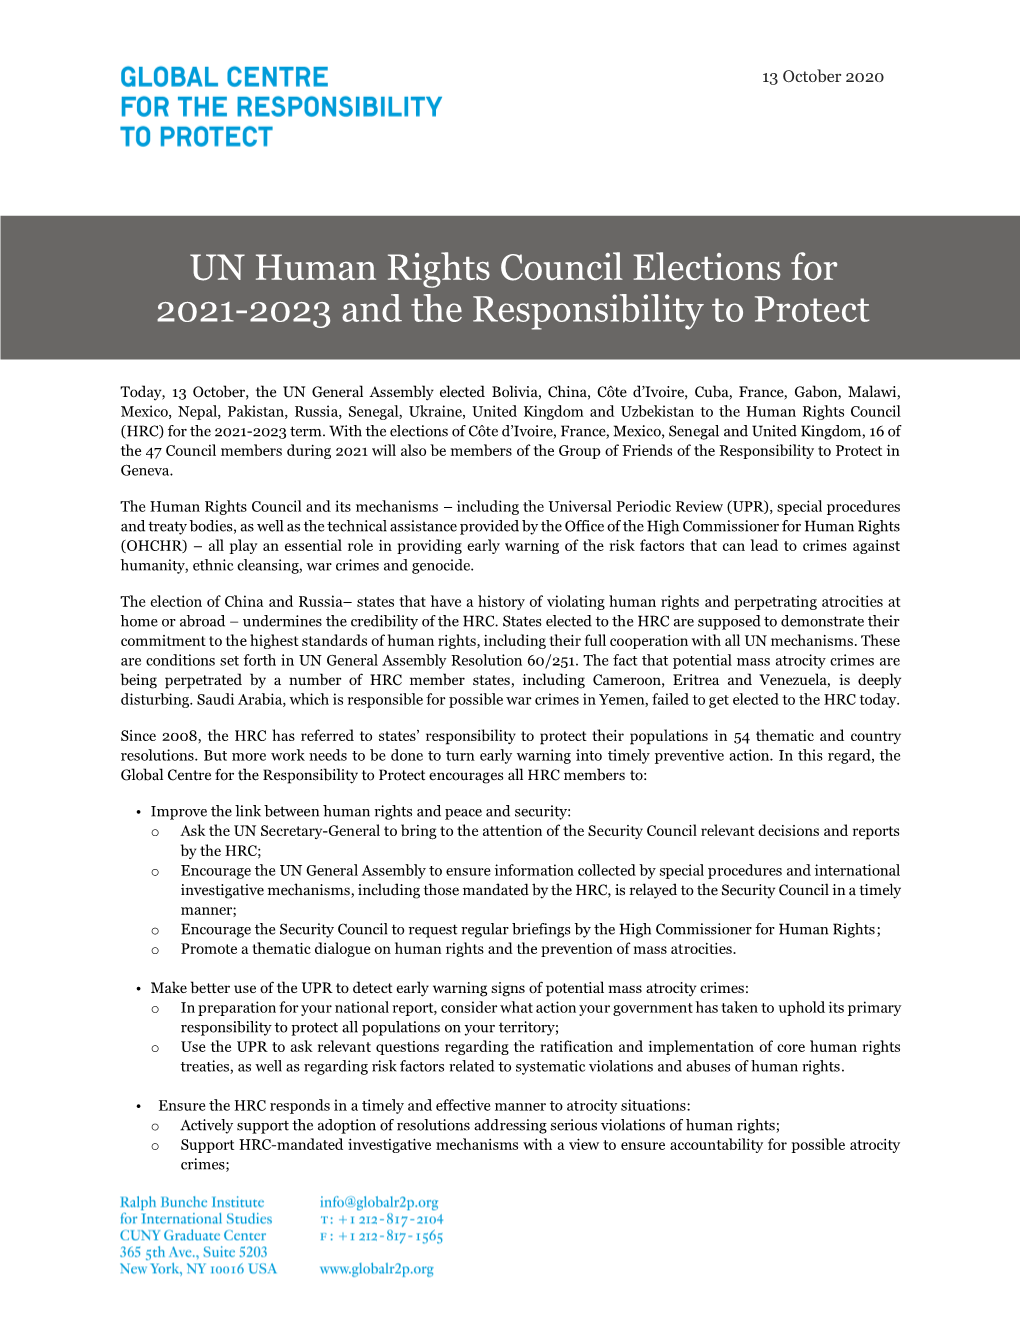 UN Human Rights Council Elections for 2021-2023 and the Responsibility to Protect